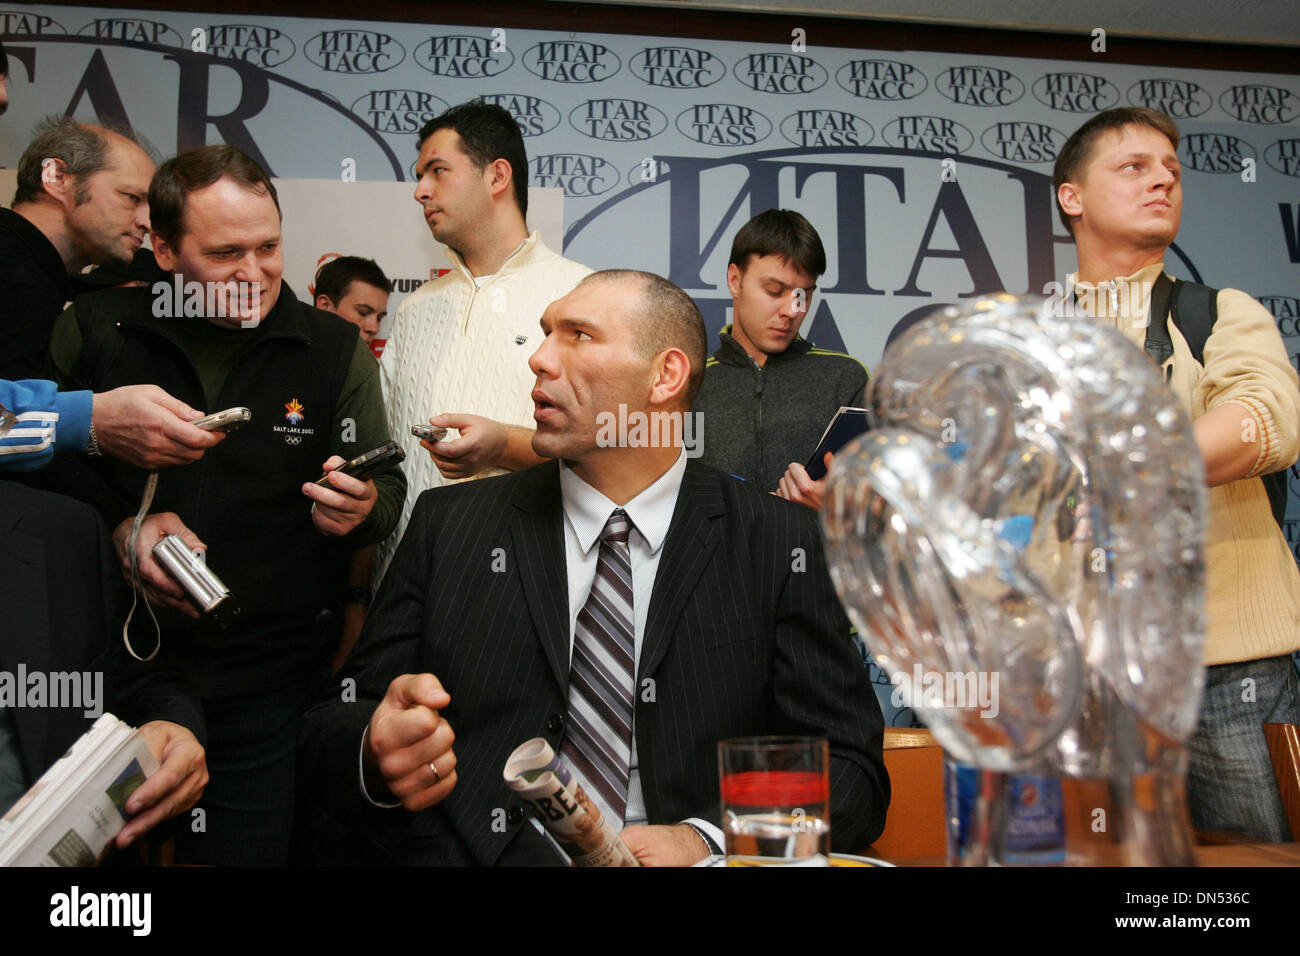 Russian heavy weight boxer Nikolai Valuev at the press conference in Moscow.(Credit Image: © PhotoXpress/ZUMA Press) RESTRICTIONS: North and South America Rights ONLY! Stock Photo